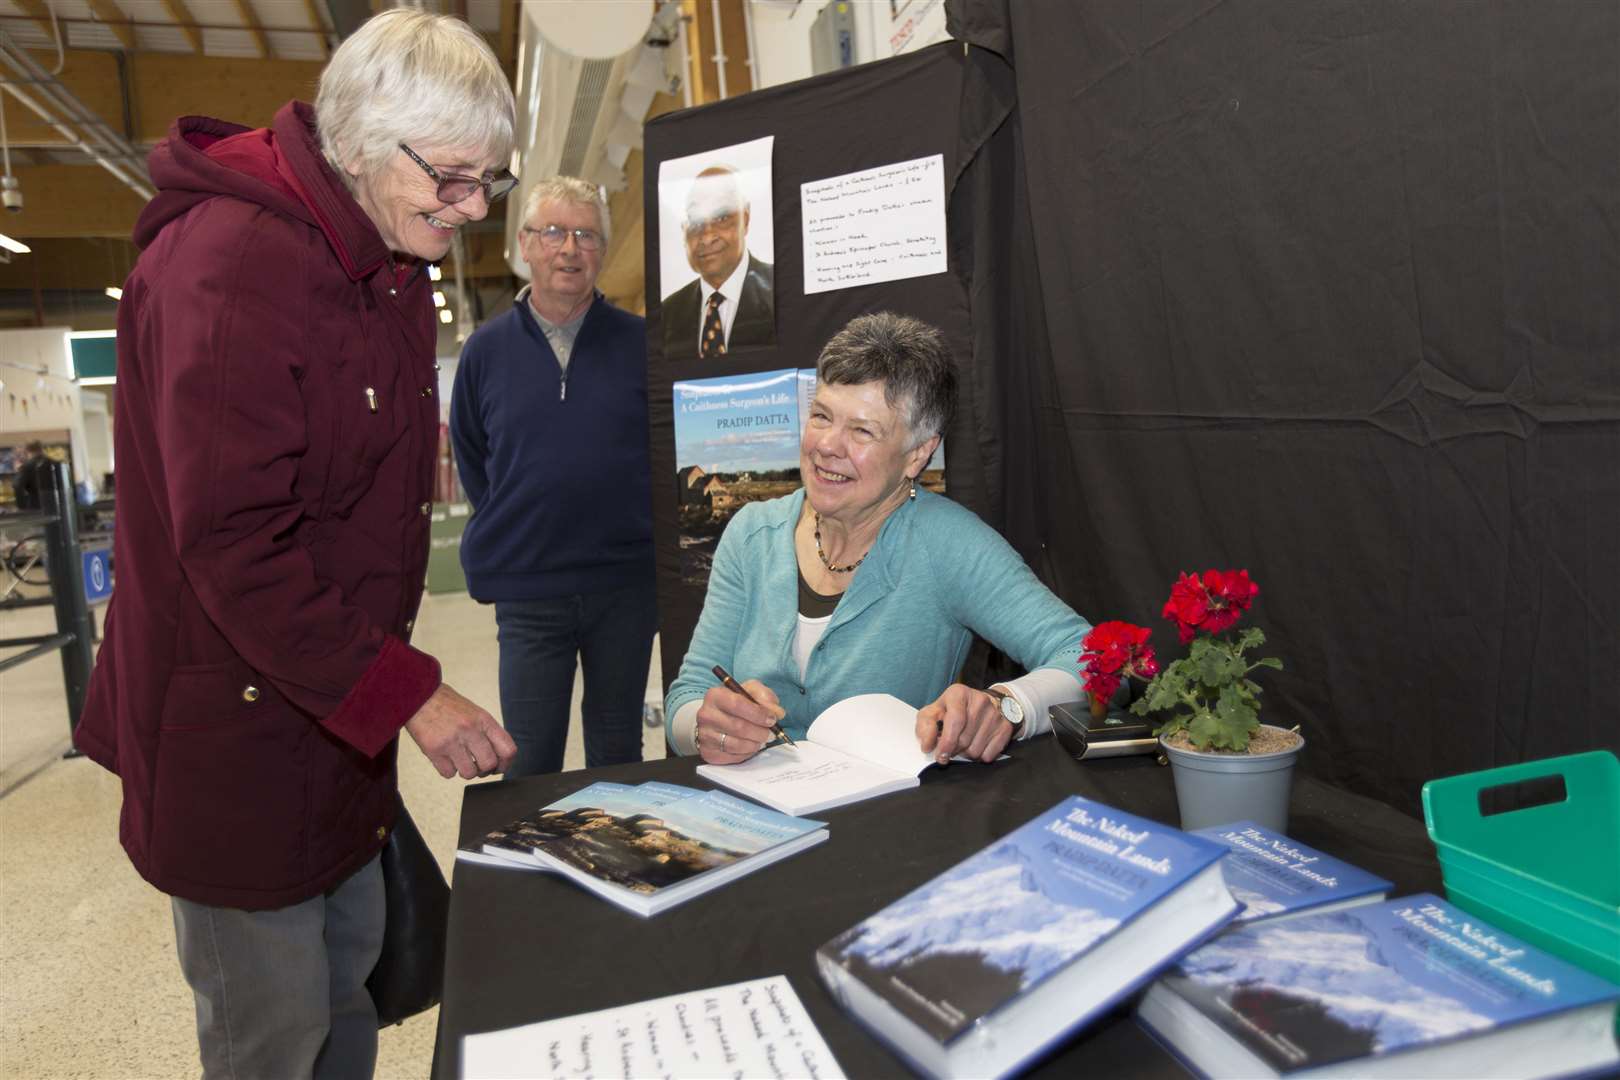 Dr Loretta Davis-Reynolds signs a copy of Snapshots of a Caithness Surgeon's Life for Elizabeth Innes, while Roy Mackenzie looks on. Picture: Robert MacDonald / Northern Studios